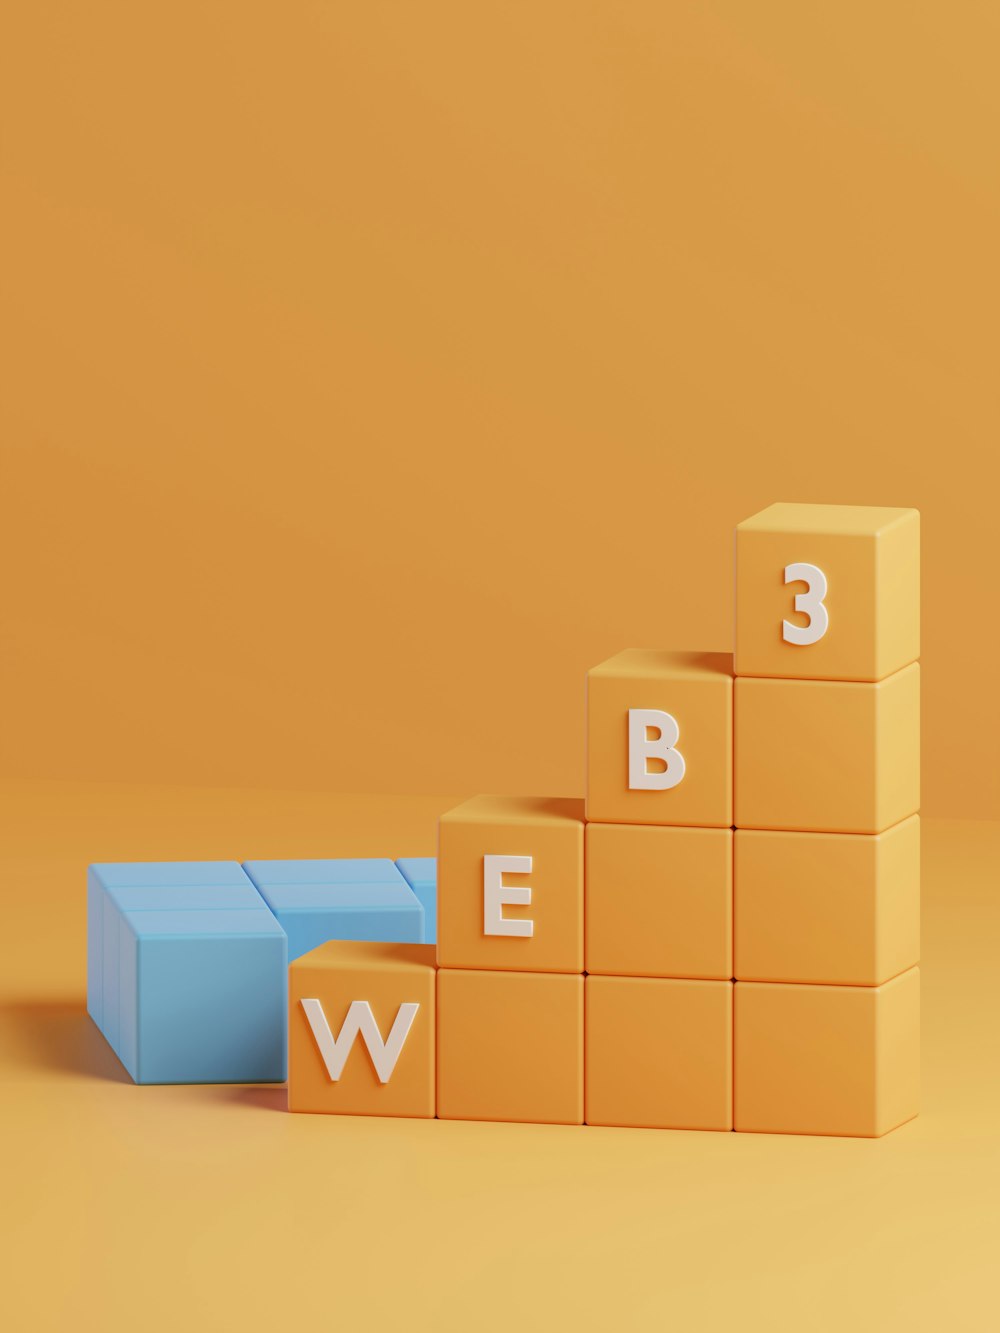 a block tower with the letters b e w on it